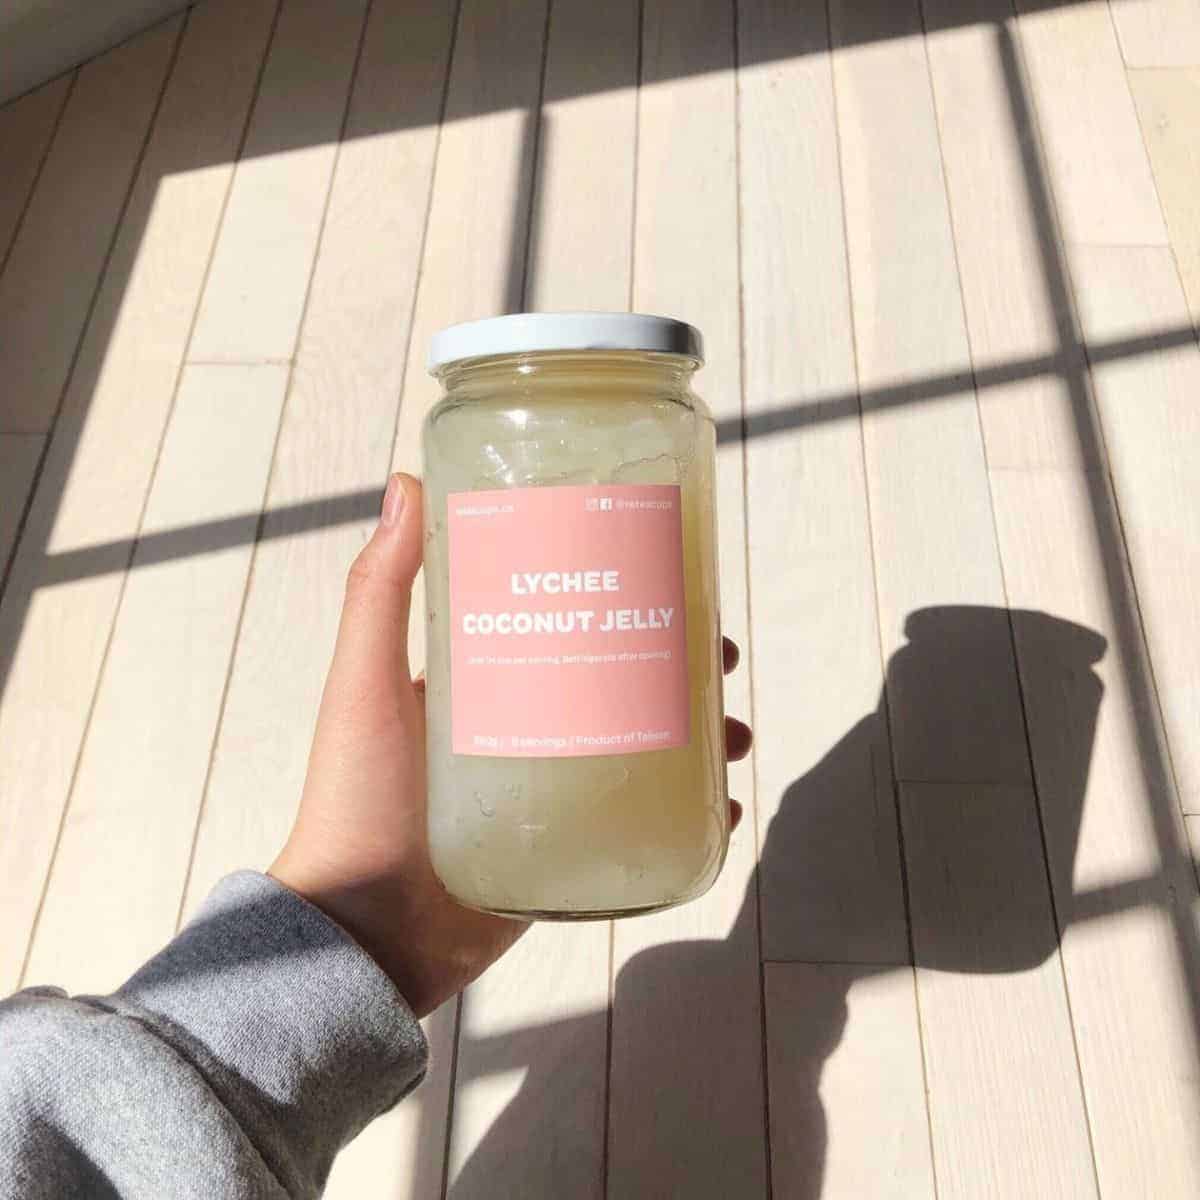 Lychee coconut jelly in a bottle with a pink sticker tag